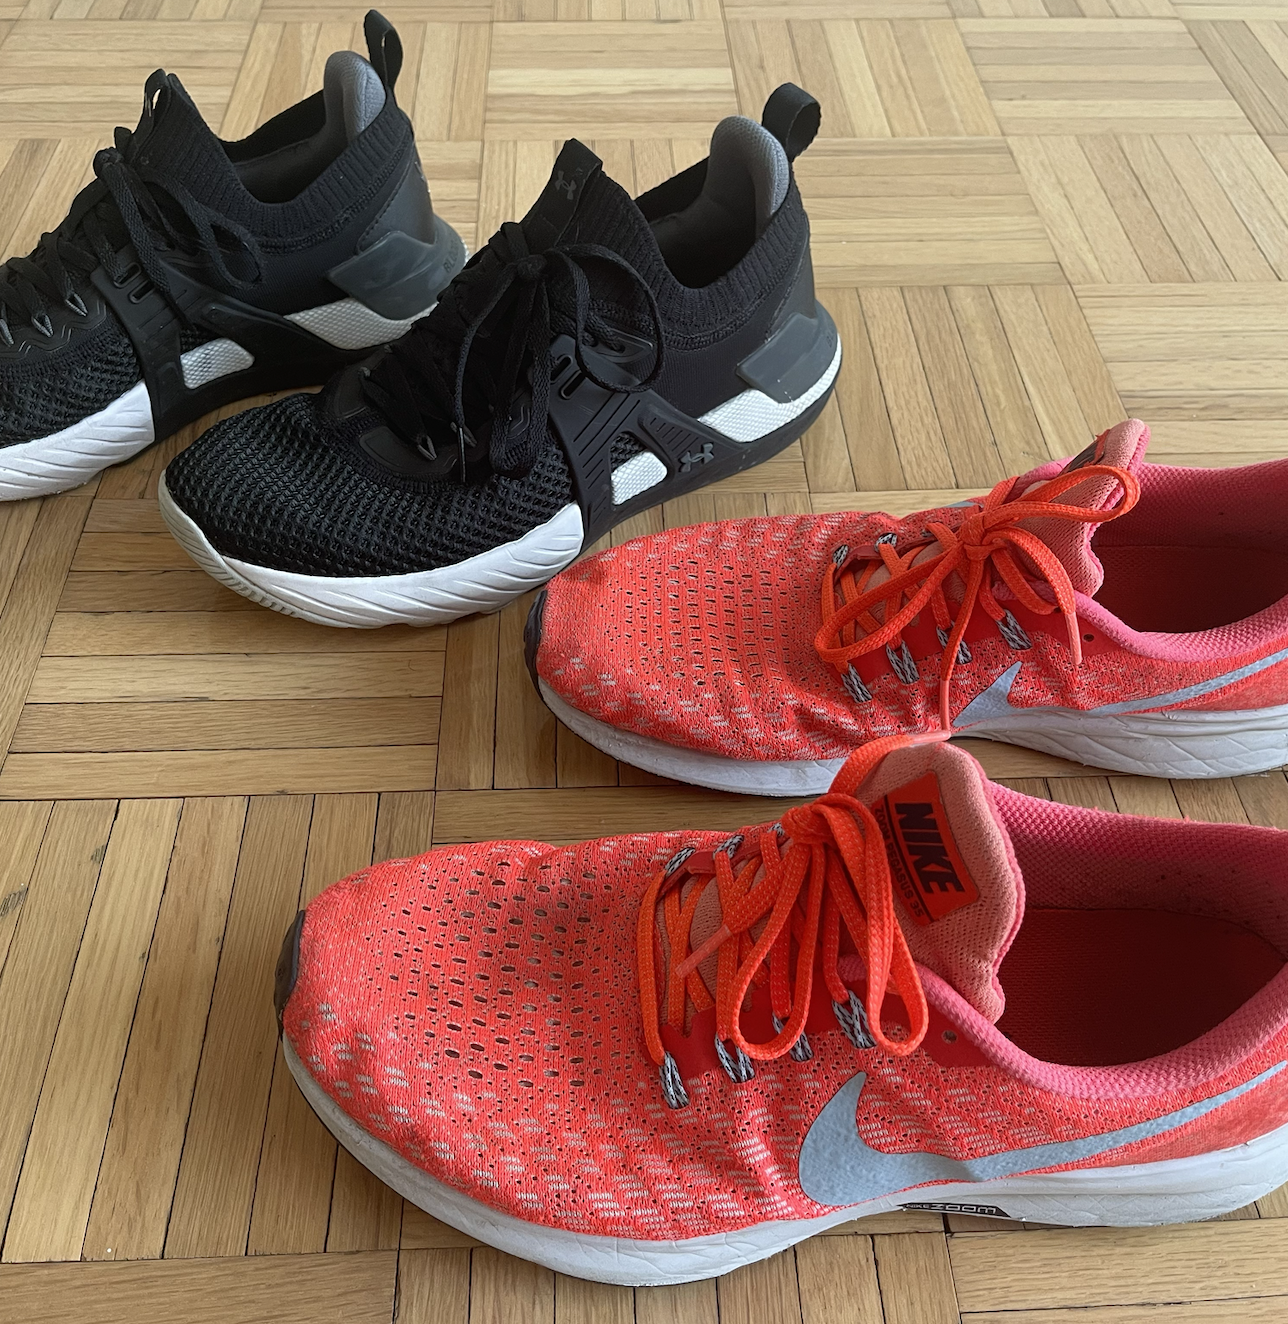 A close-up of two pairs of my running shoes, one black and the other orange